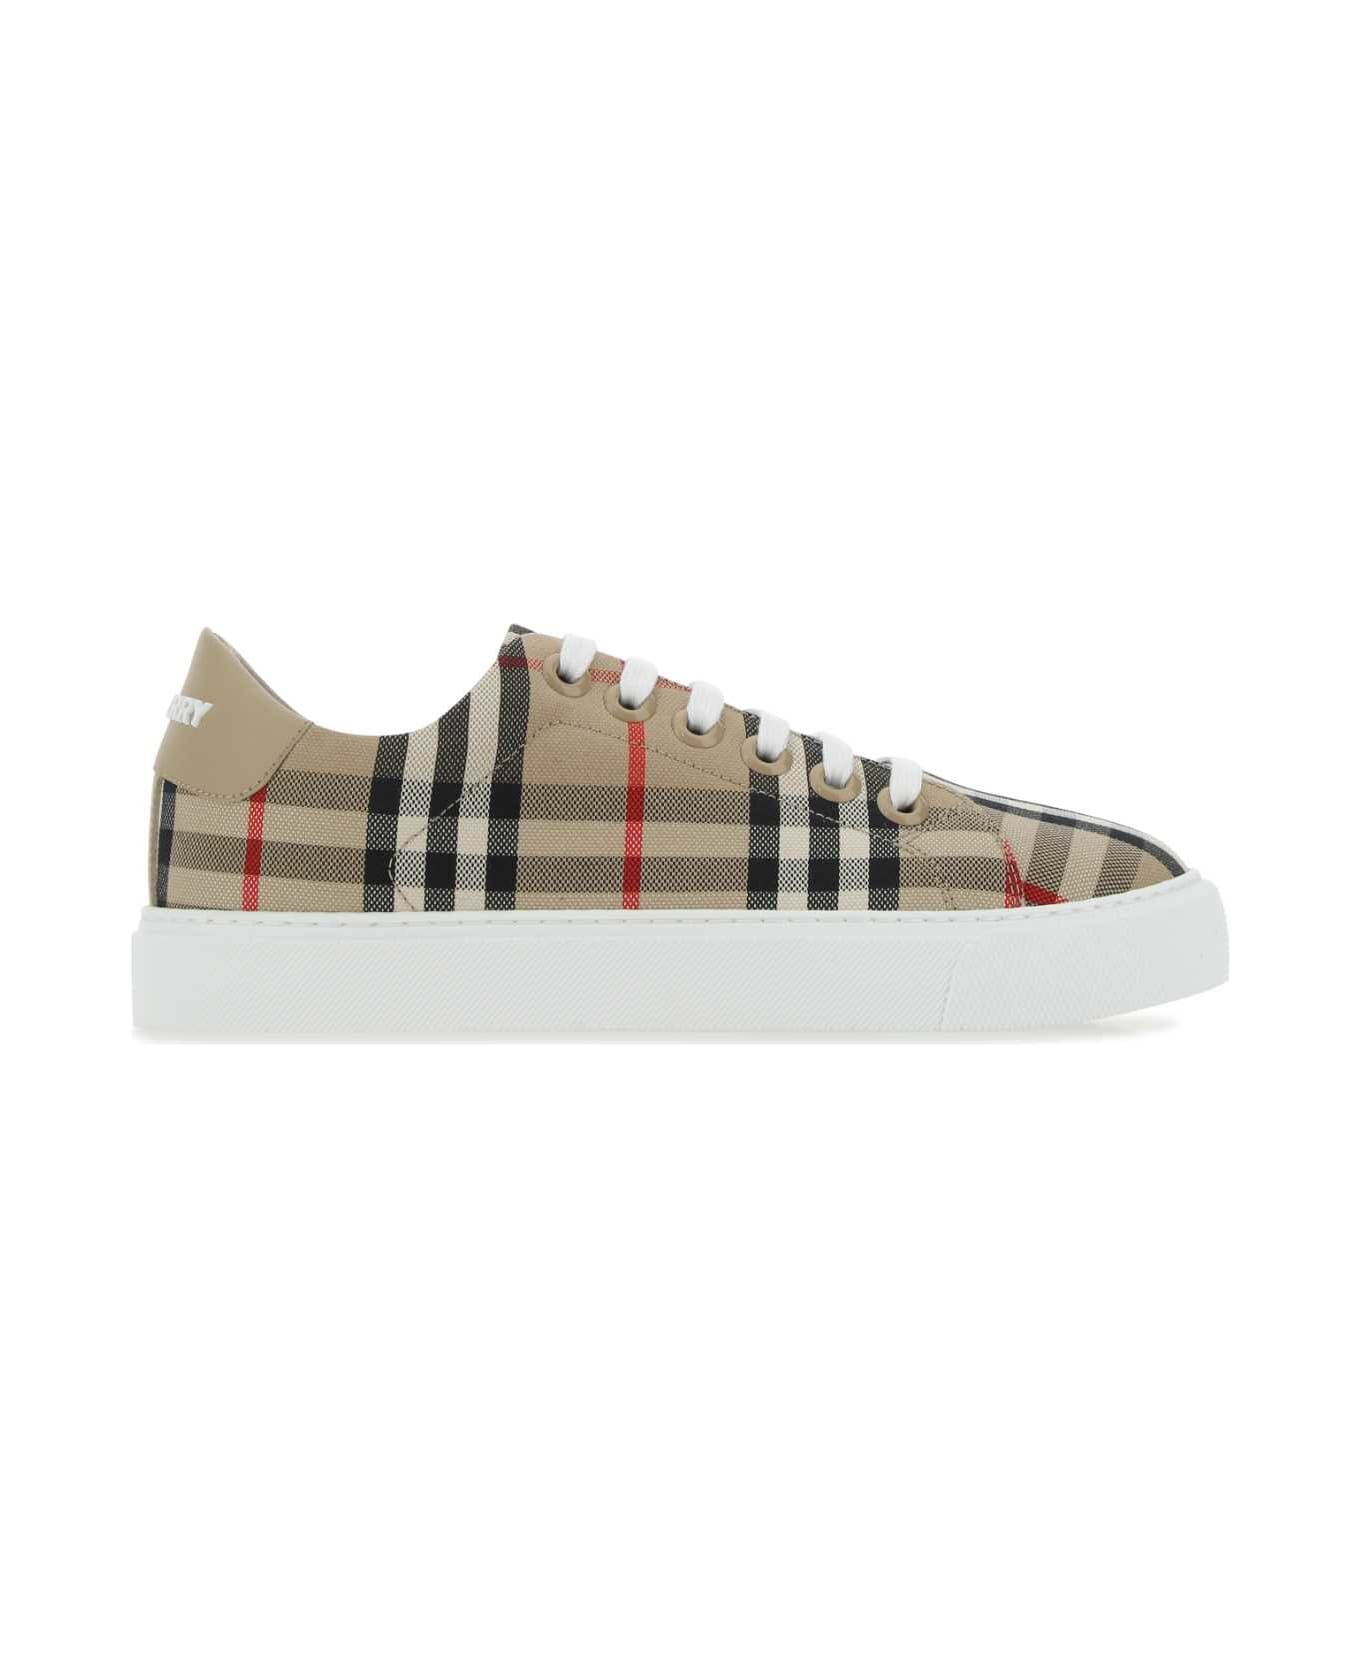 Burberry Embroidered Canvas Sneakers - A7026